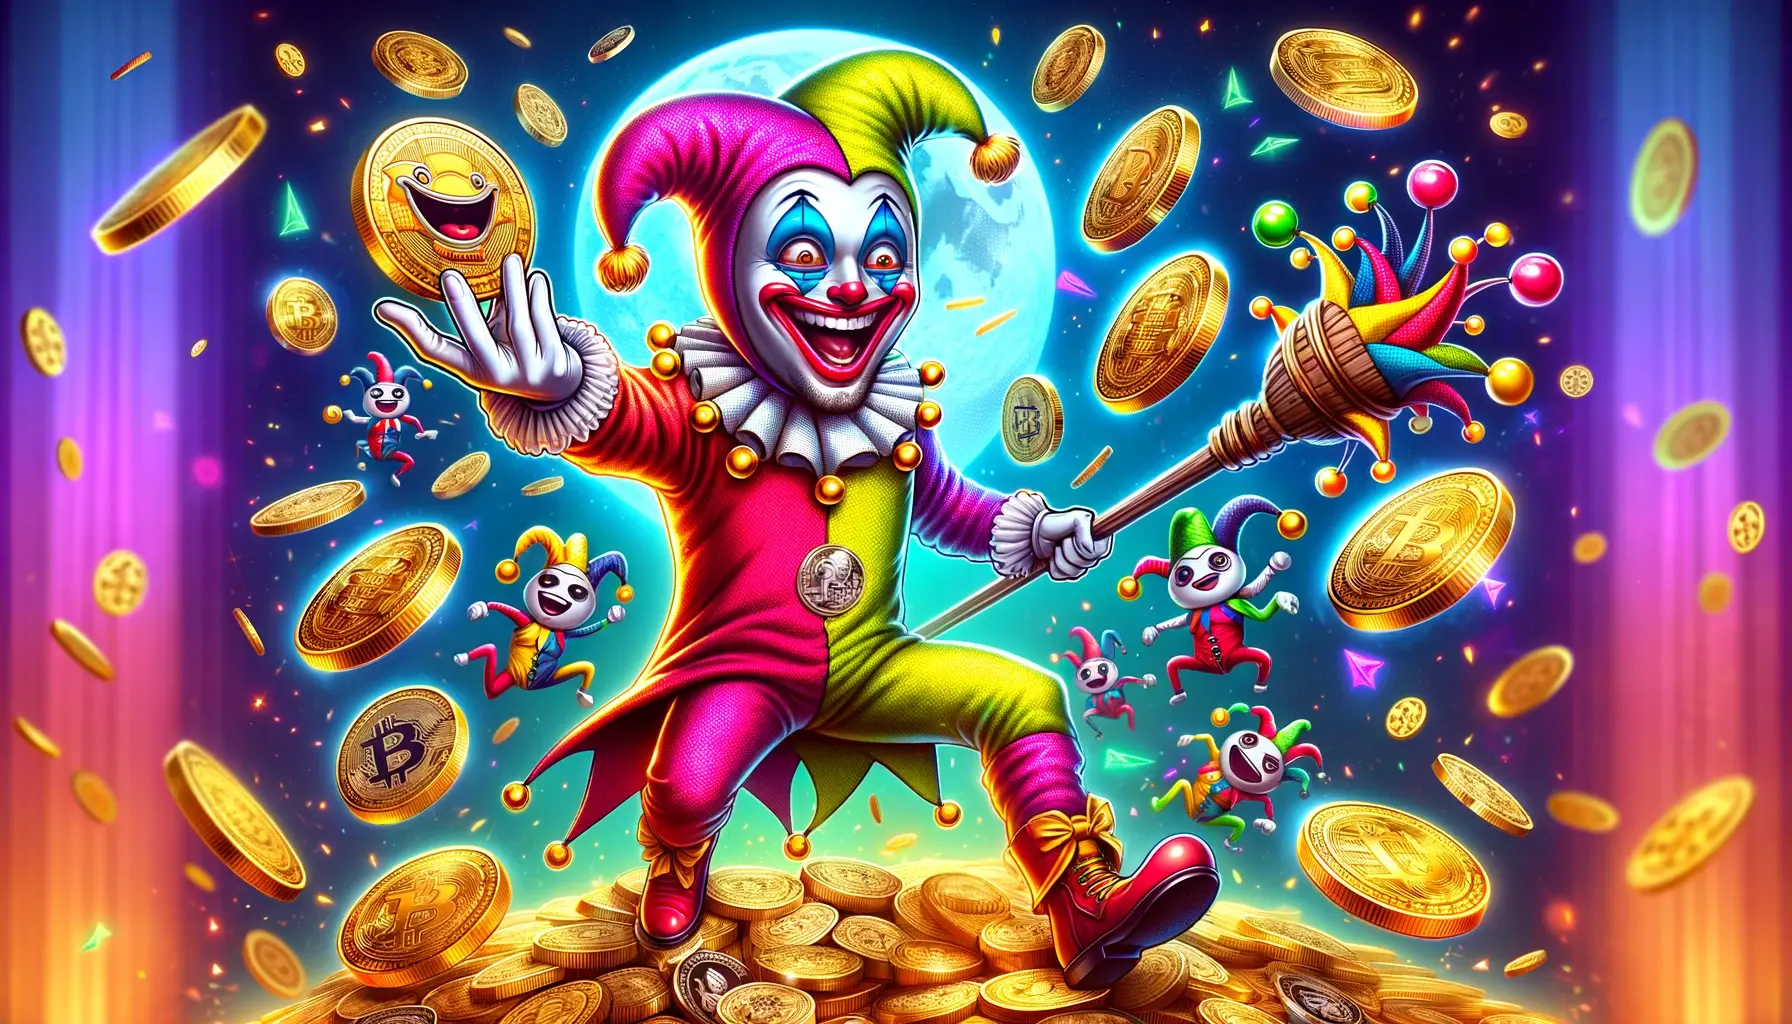 Meme Coins The Jester Kings of Crypto